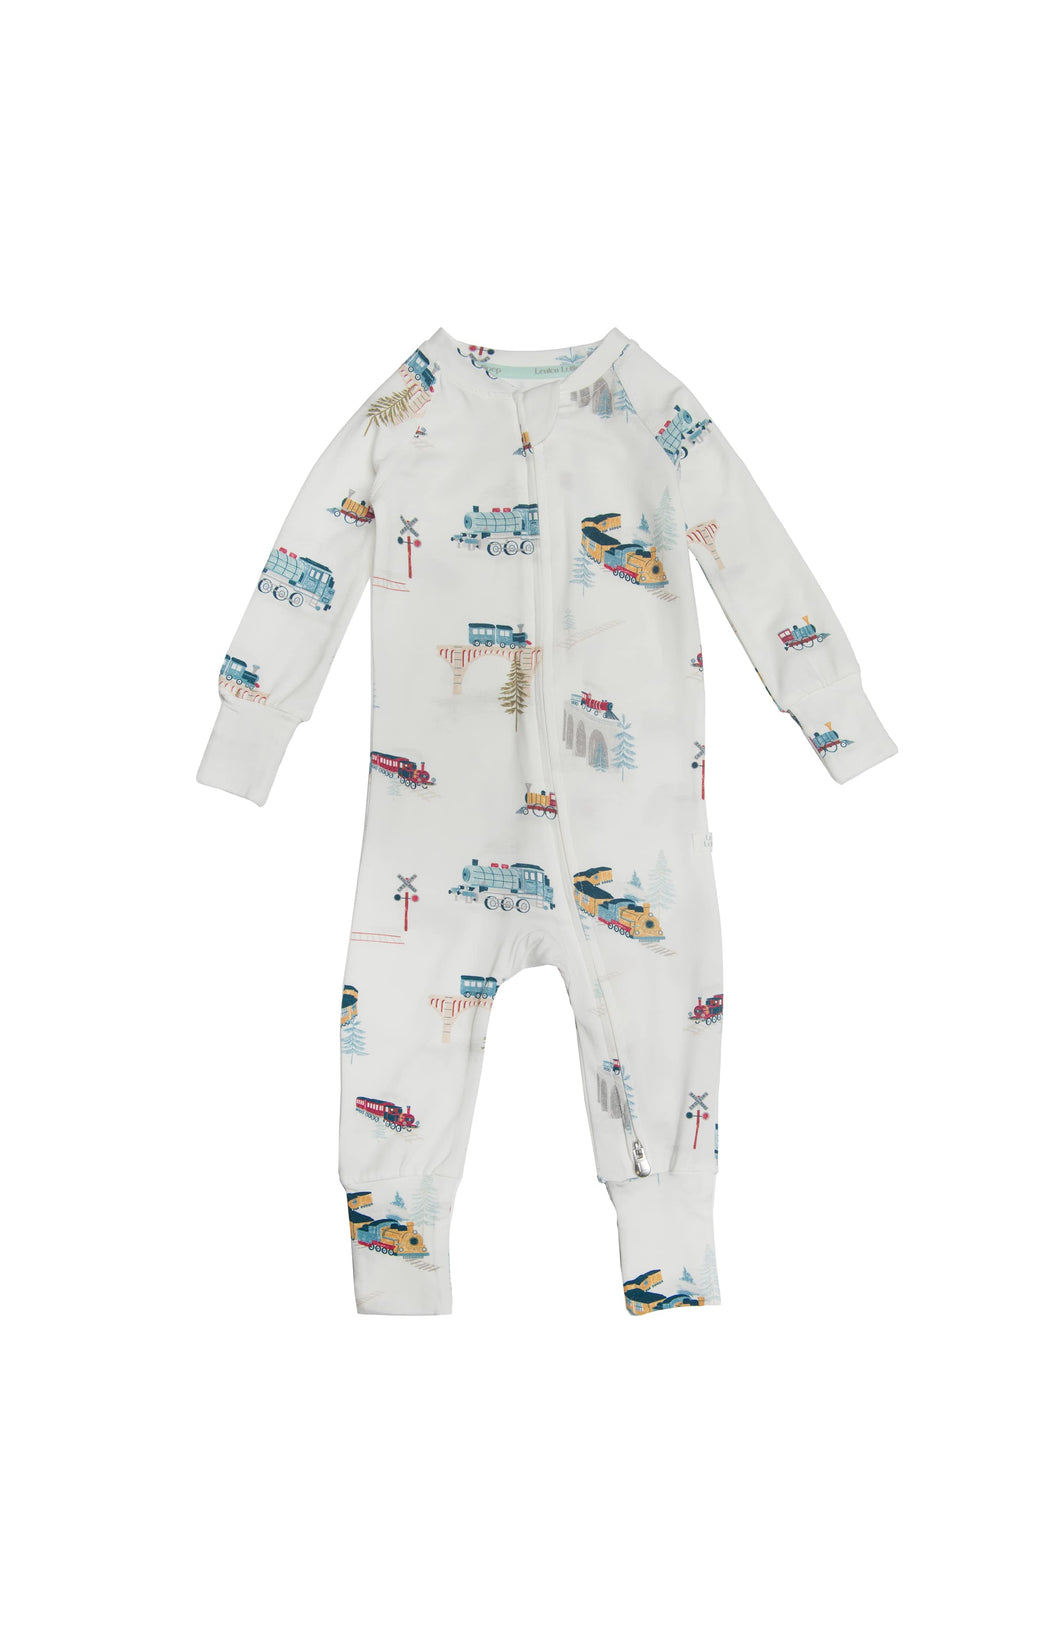 Sleeper - All Aboard SIZE 0-3 MONTHS AND 3-6 MONTHS